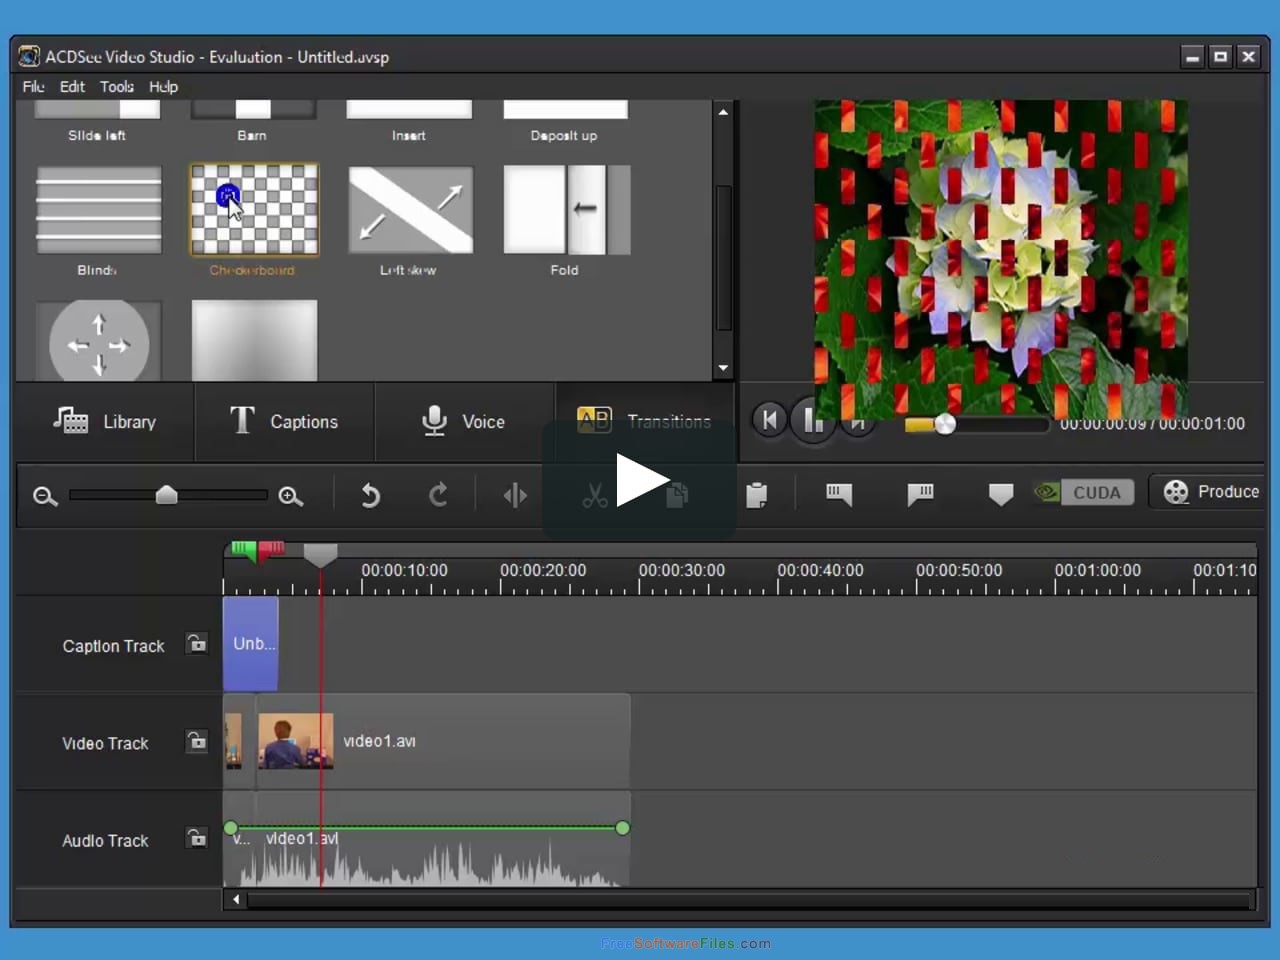 ACDSee Video Studio 3.0 Free Download for Windows PC